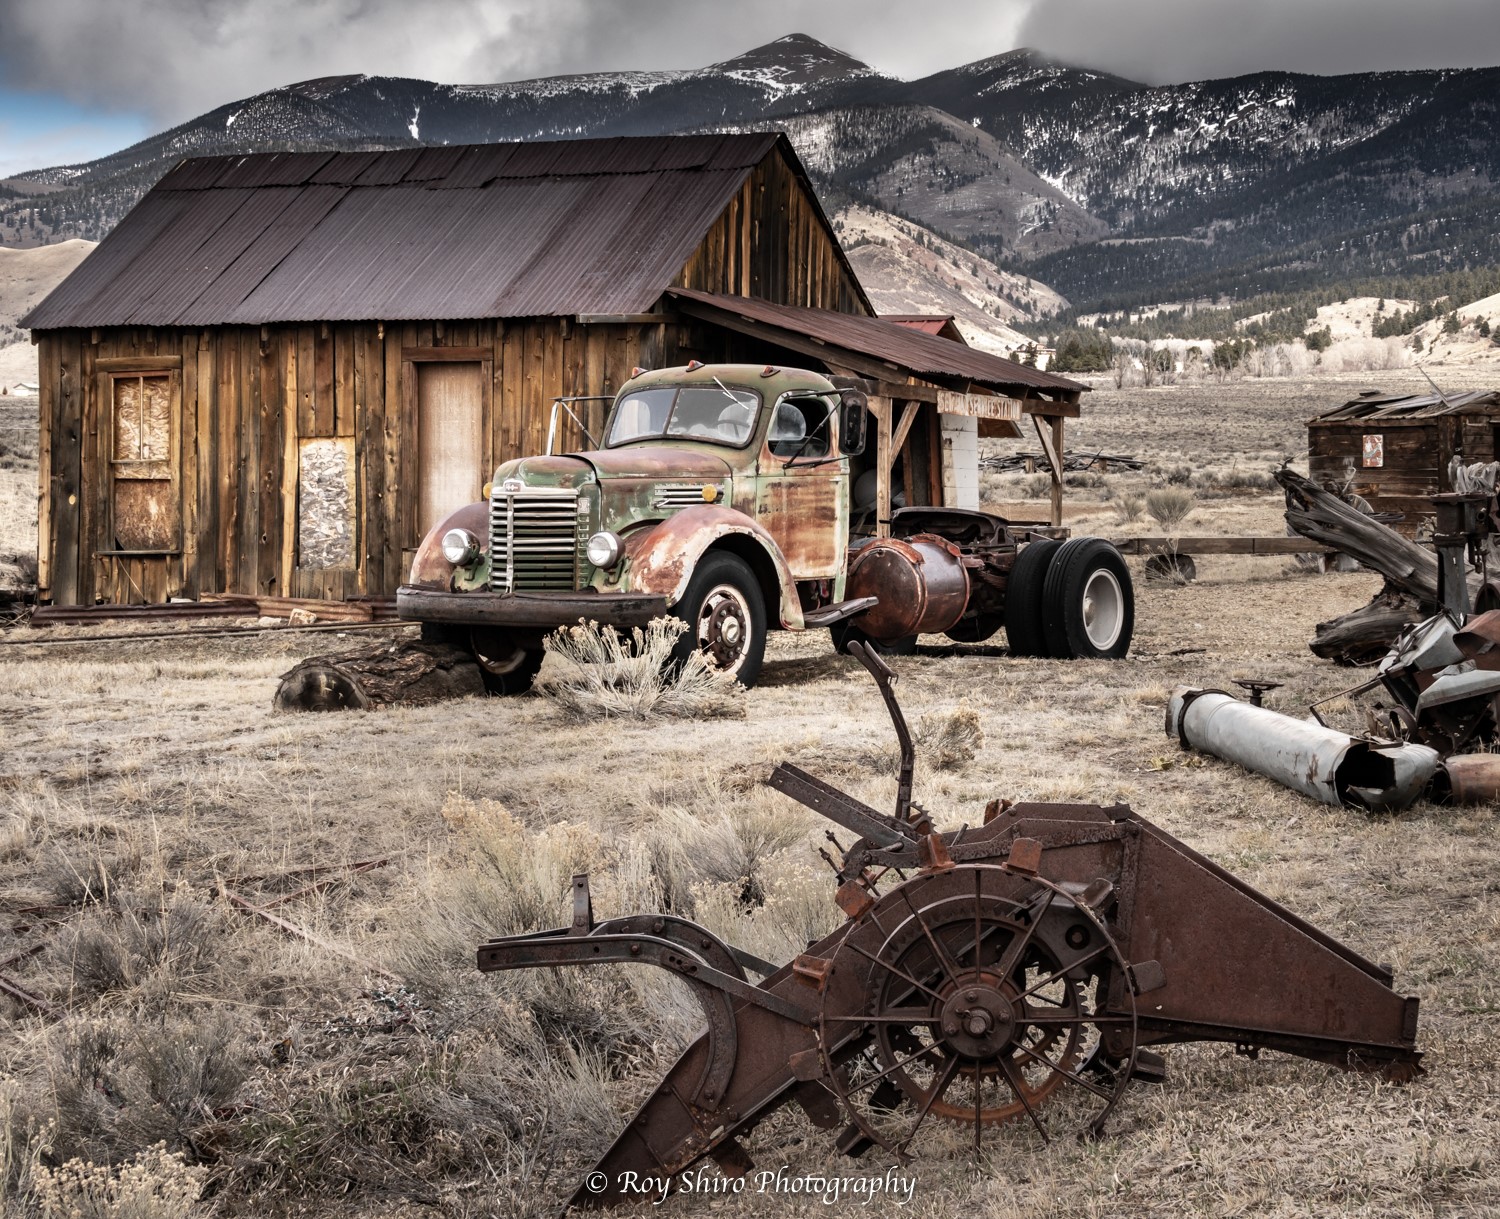 Rustic truck in front of a rustic cabin with a mountain range in the background